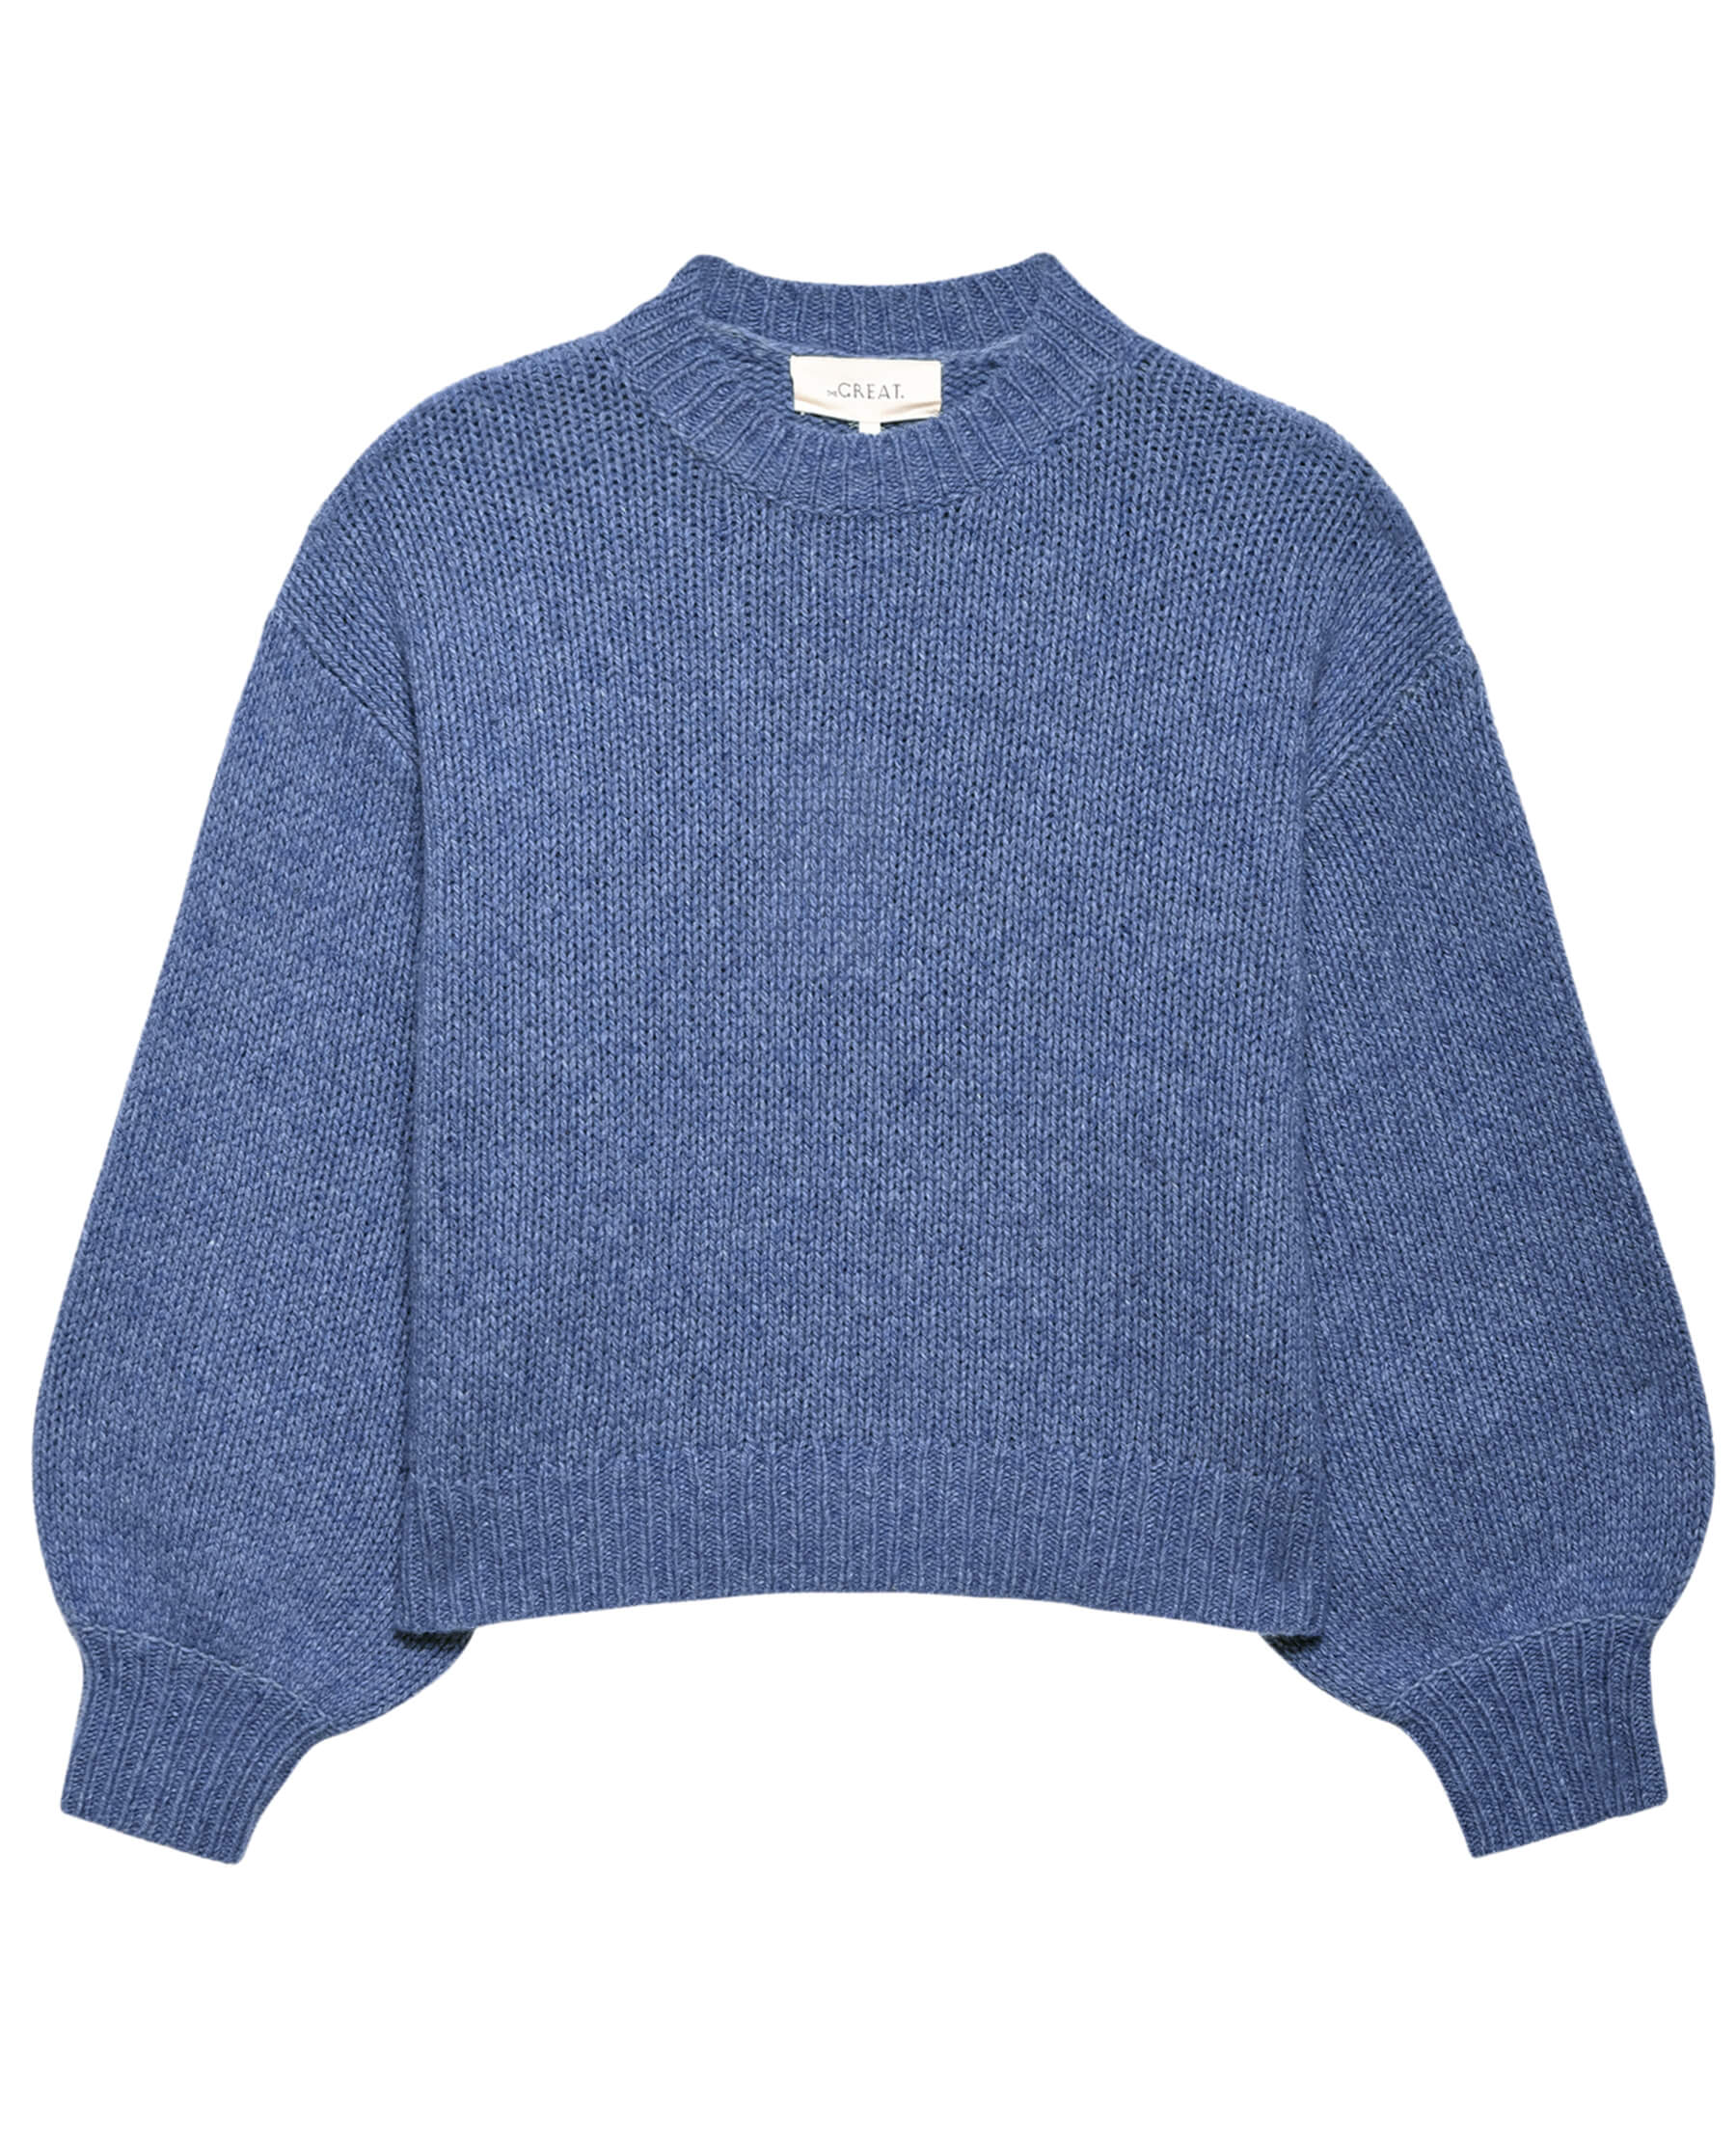 The Bubble Pullover. -- Riverbed